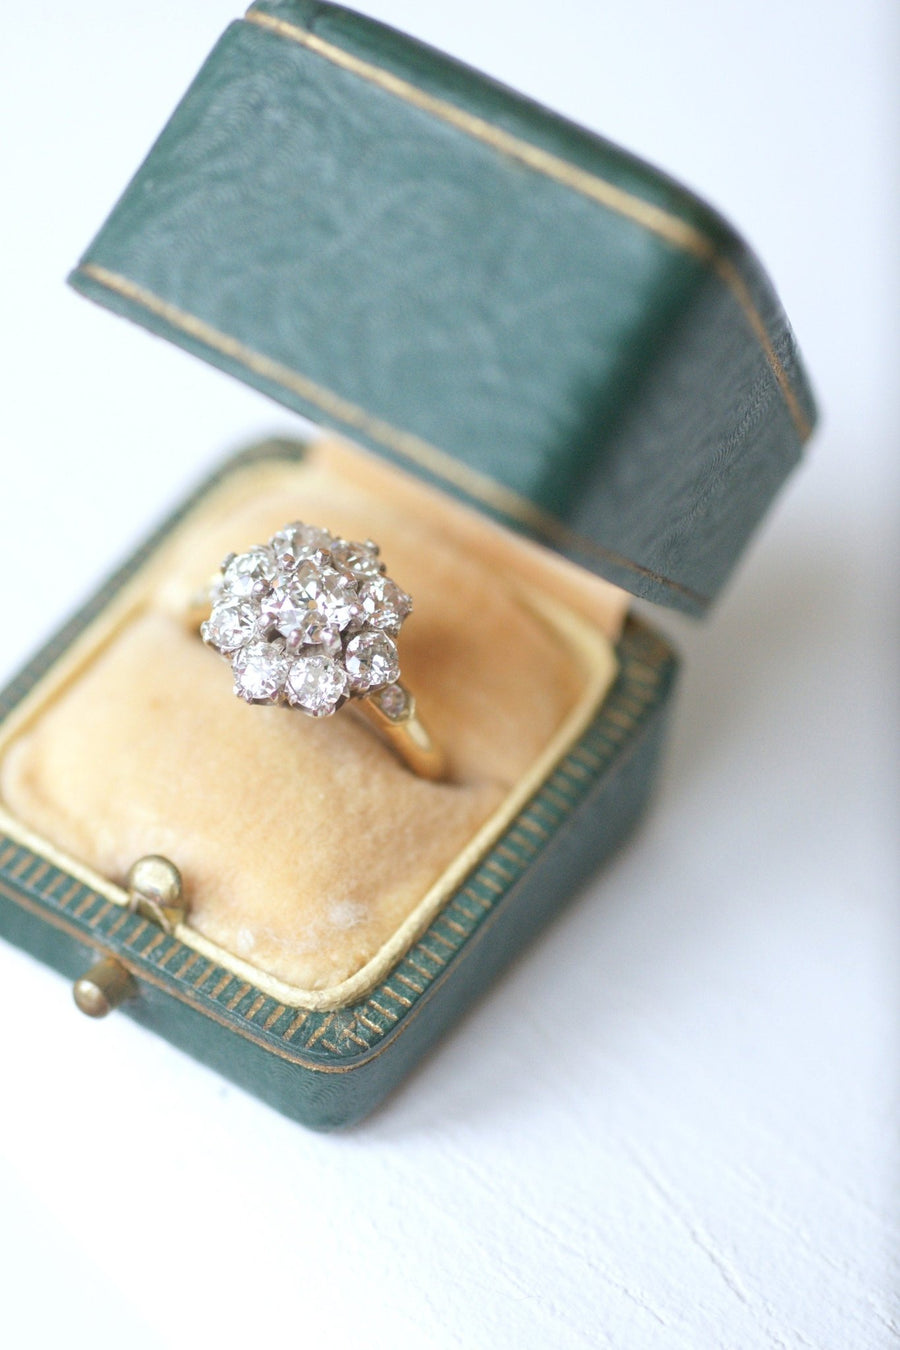 Antique daisy ring with diamonds 2.30 Cts - Penelope Gallery